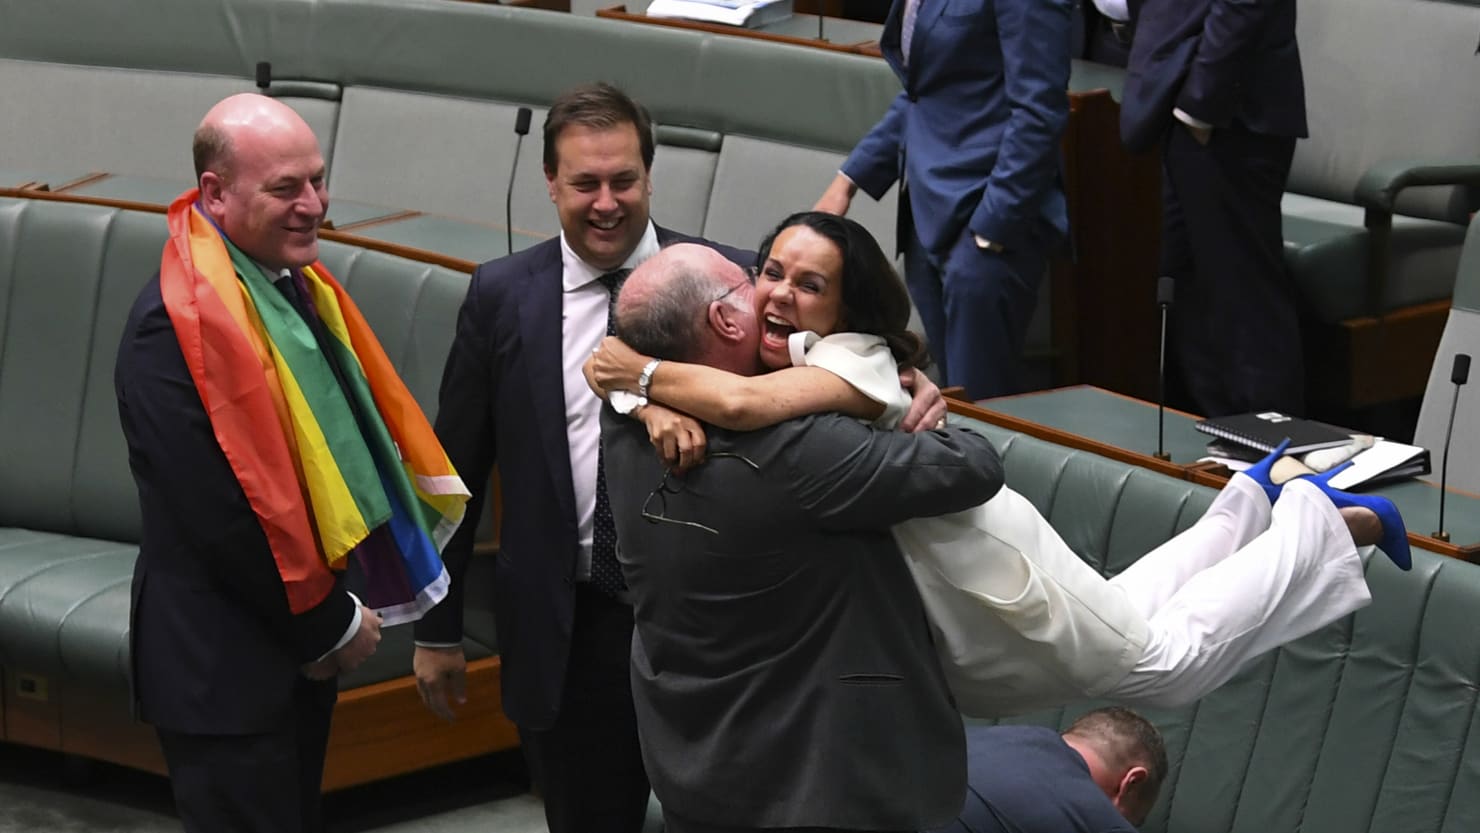 Marriage Equality Passes Australia’s Parliament in Landslide